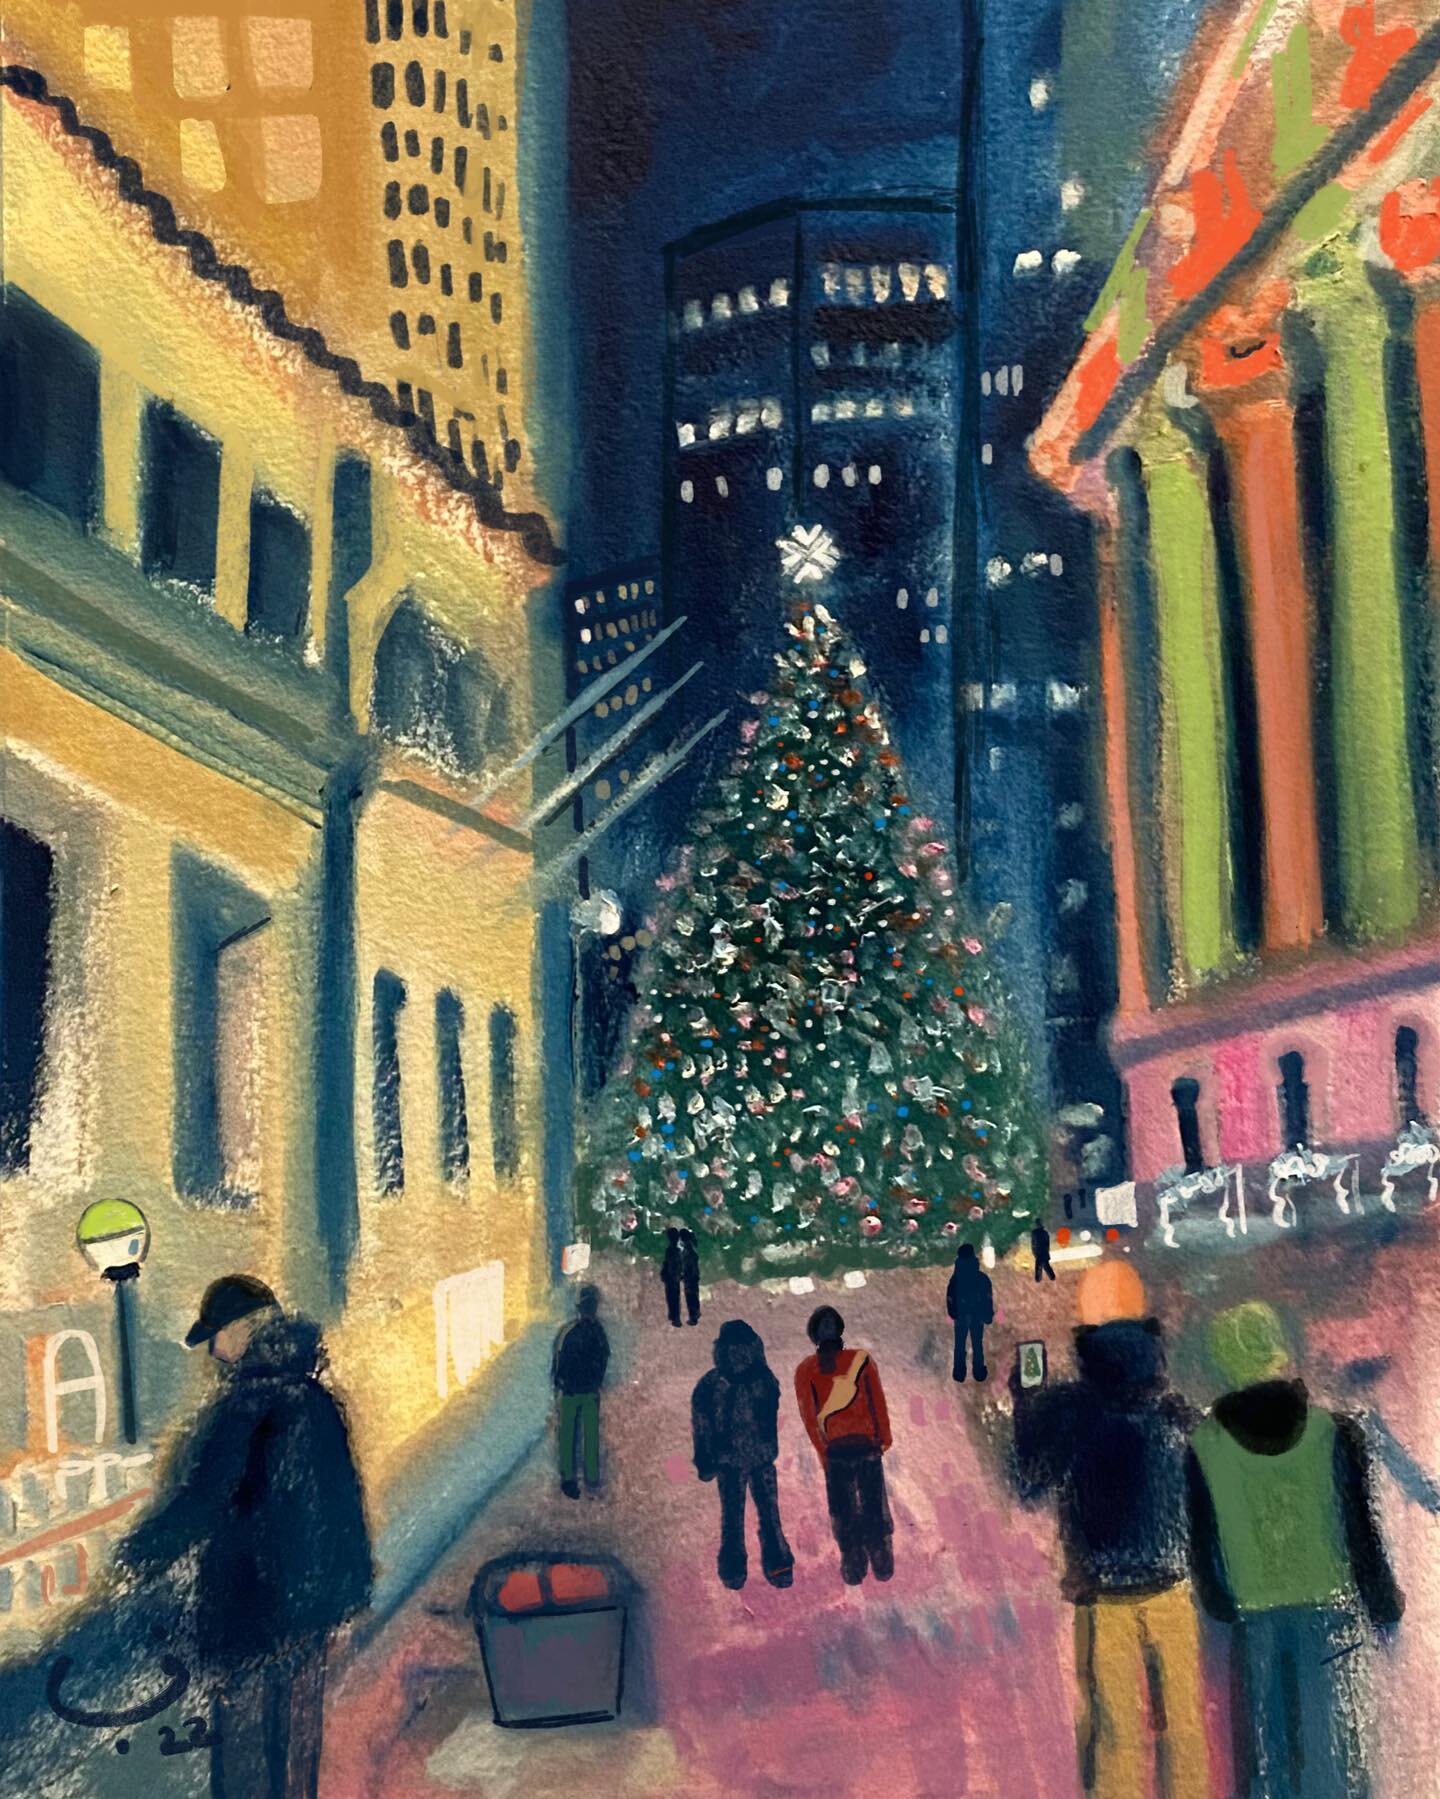 Walking by the New York stock exchange Christmas tree 🎄#nyse #nysechristmastree #wallstreet 
22 x 30 cm